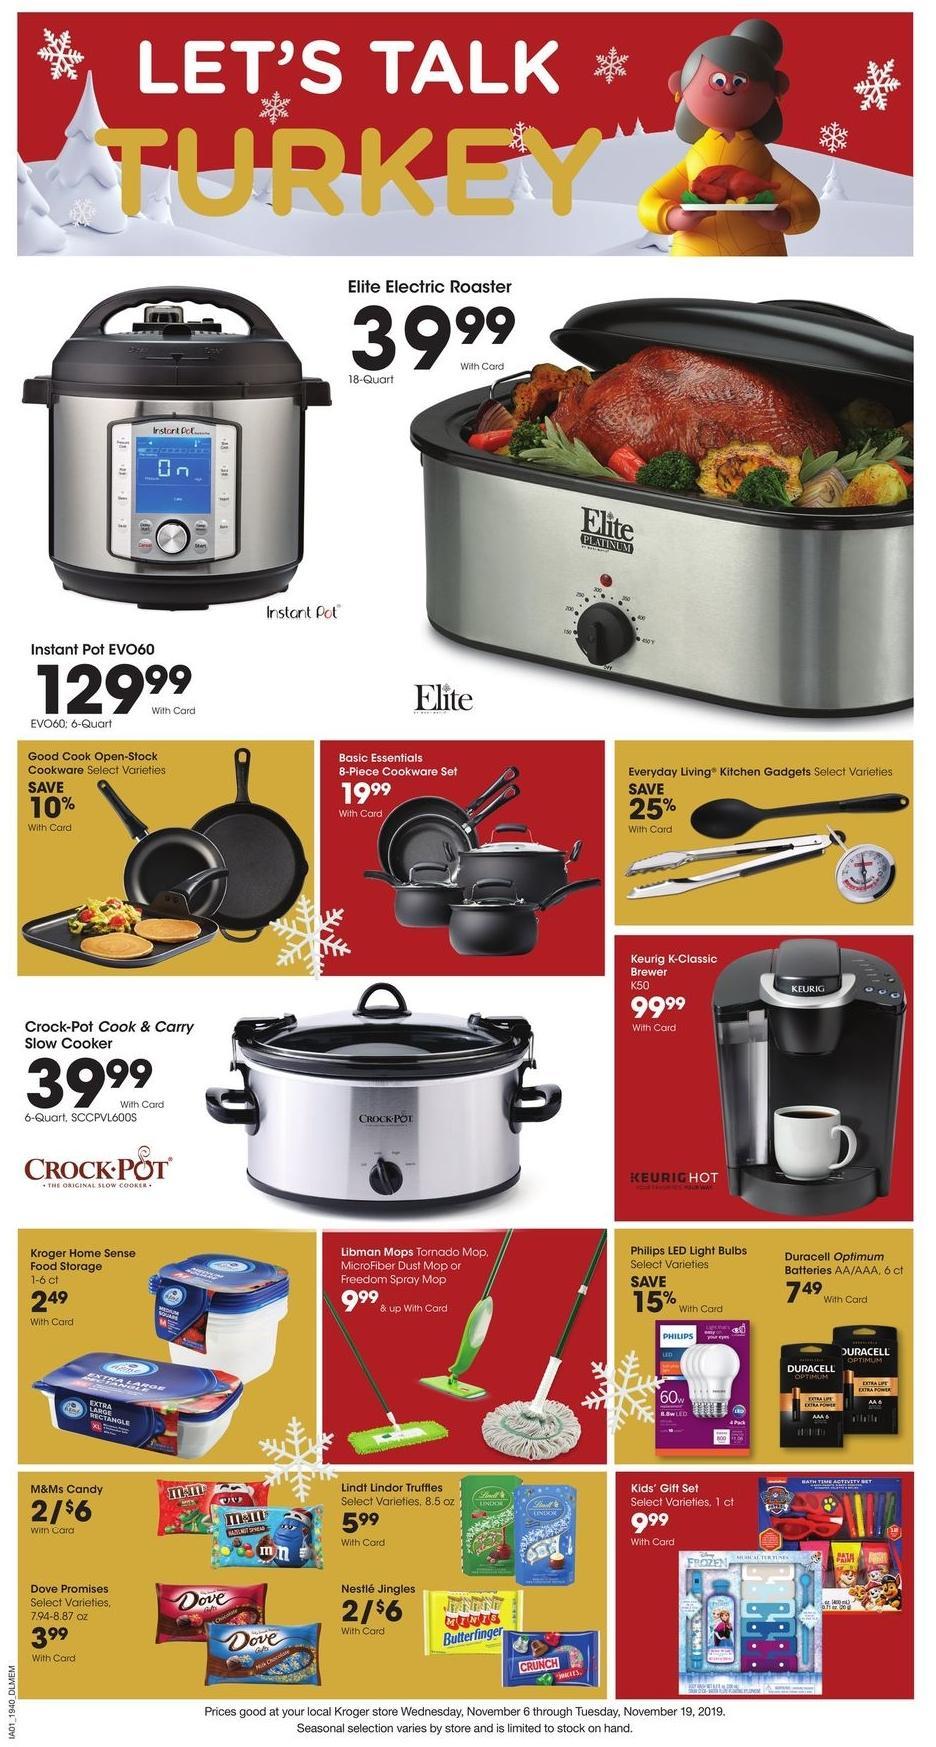 Kroger Weekly Ad from November 13